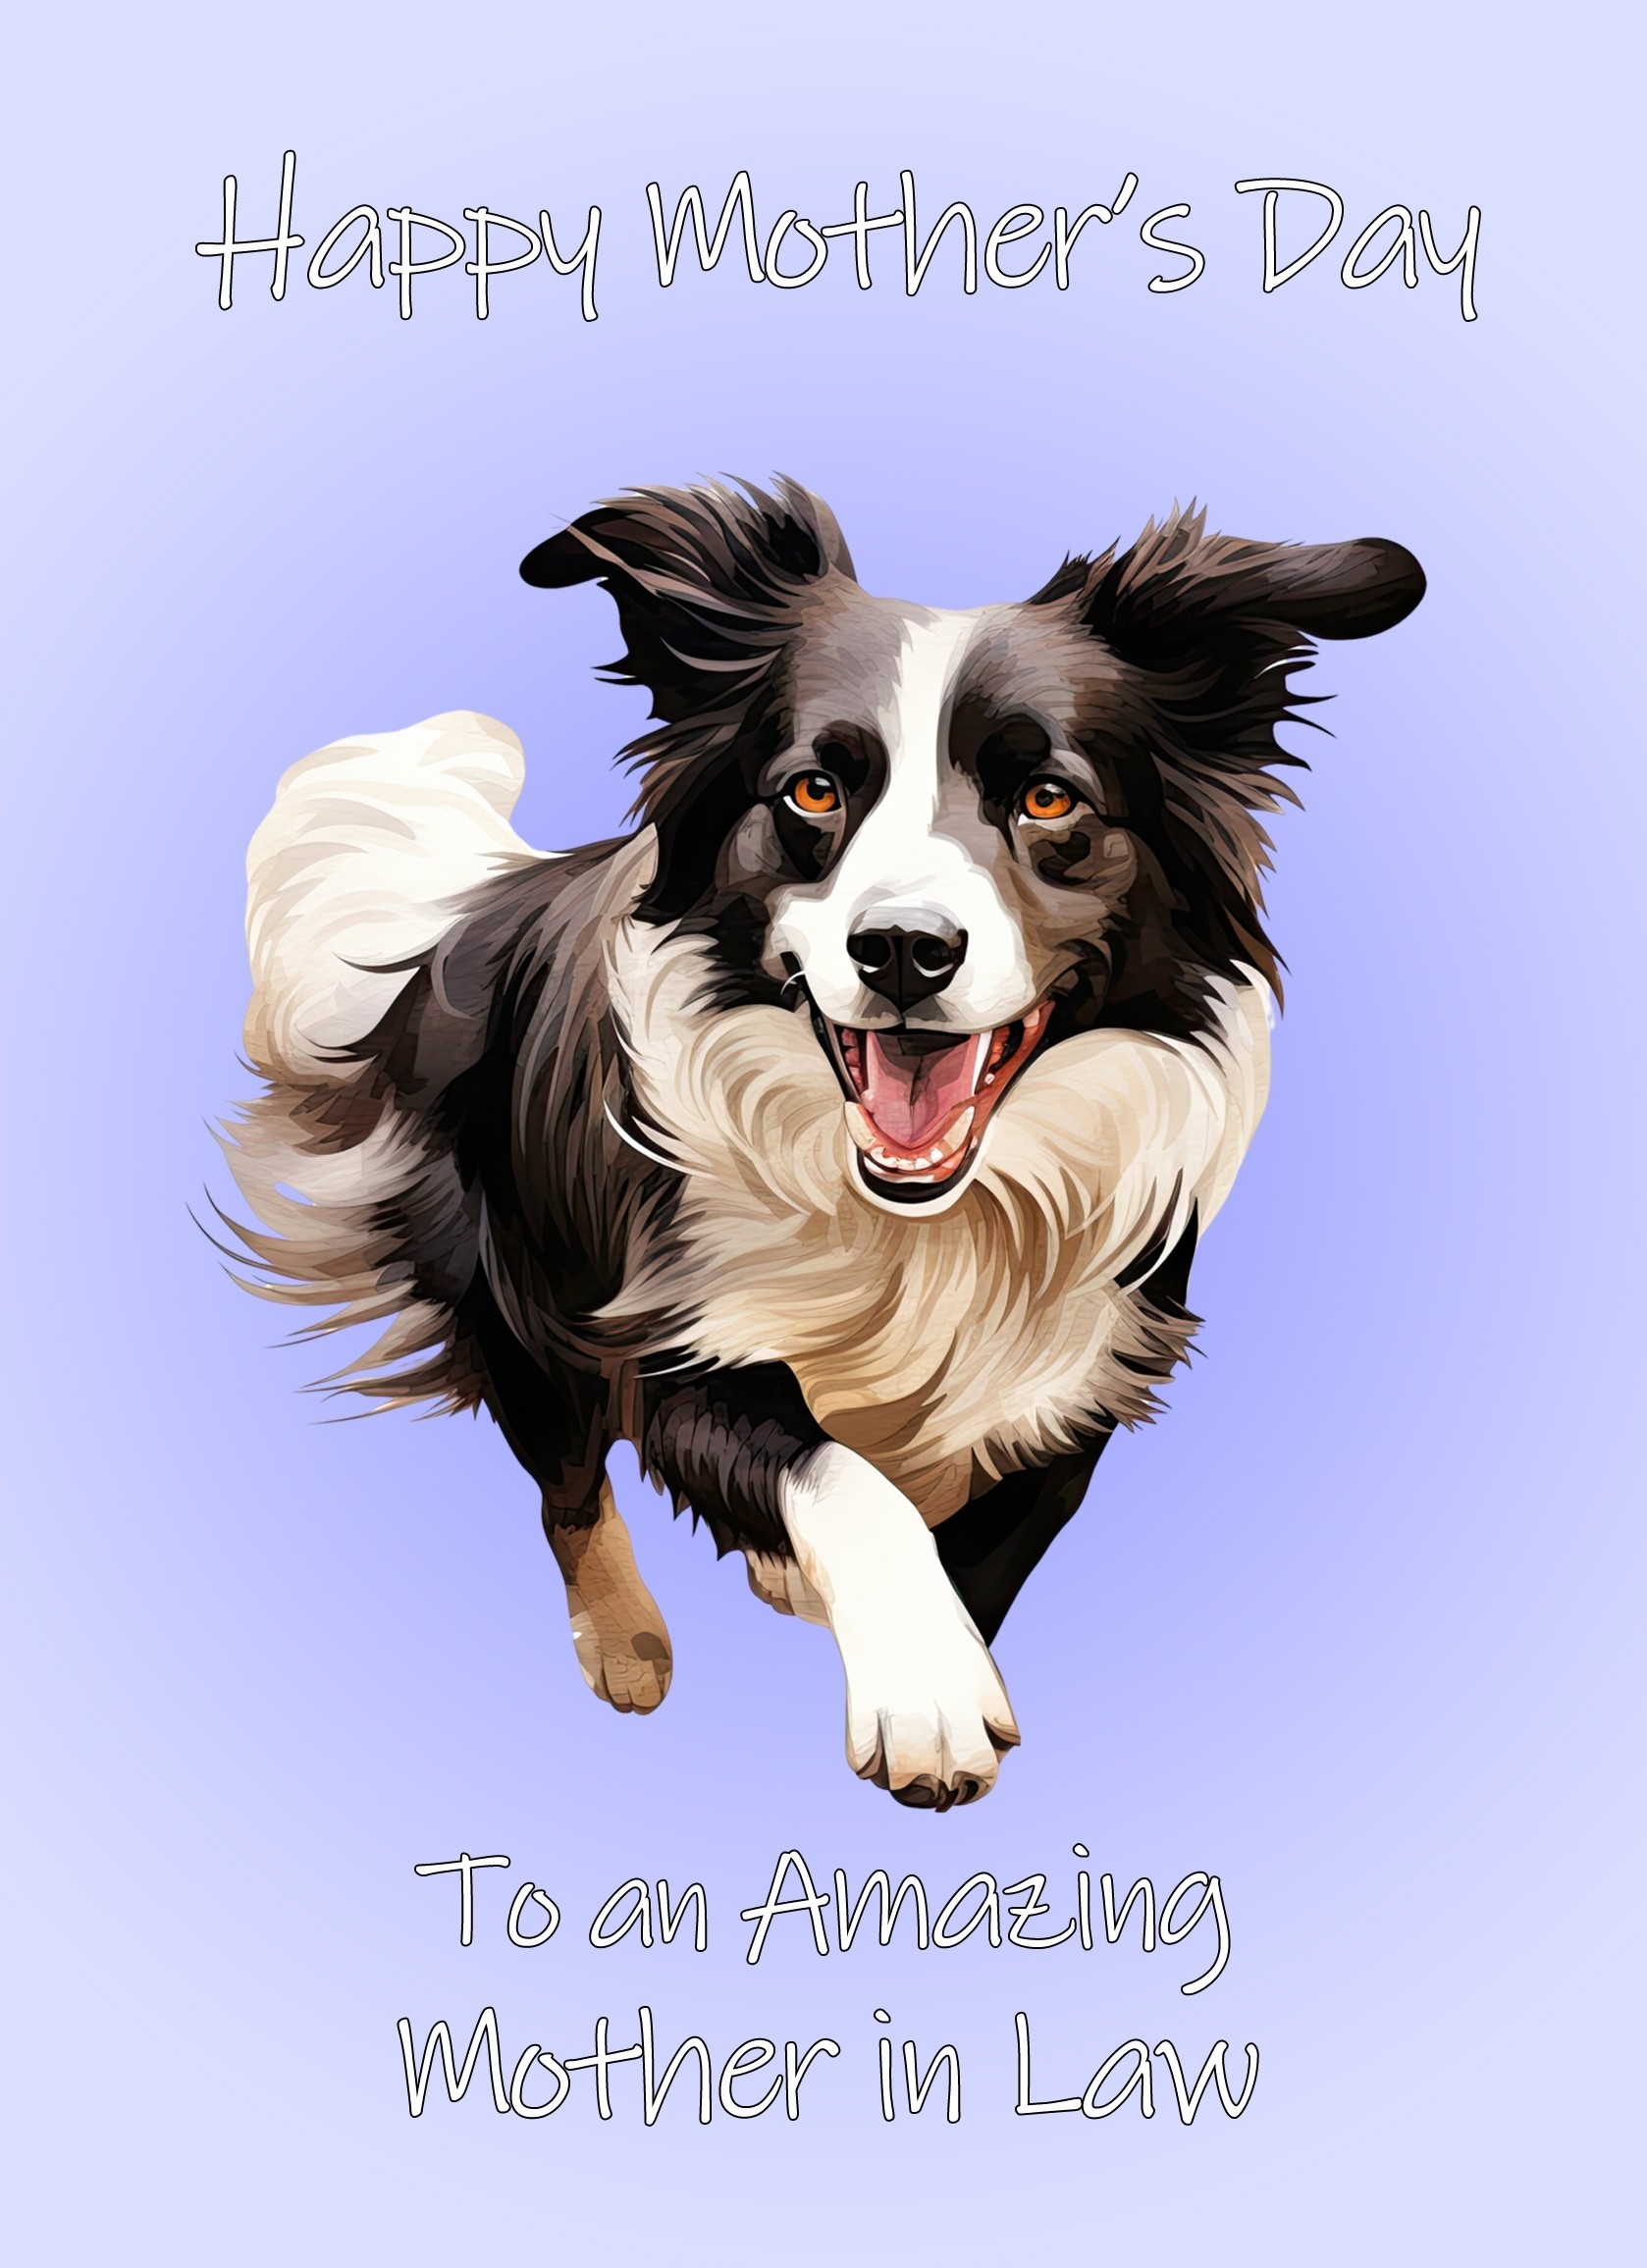 Border Collie Dog Mothers Day Card For Mother in Law